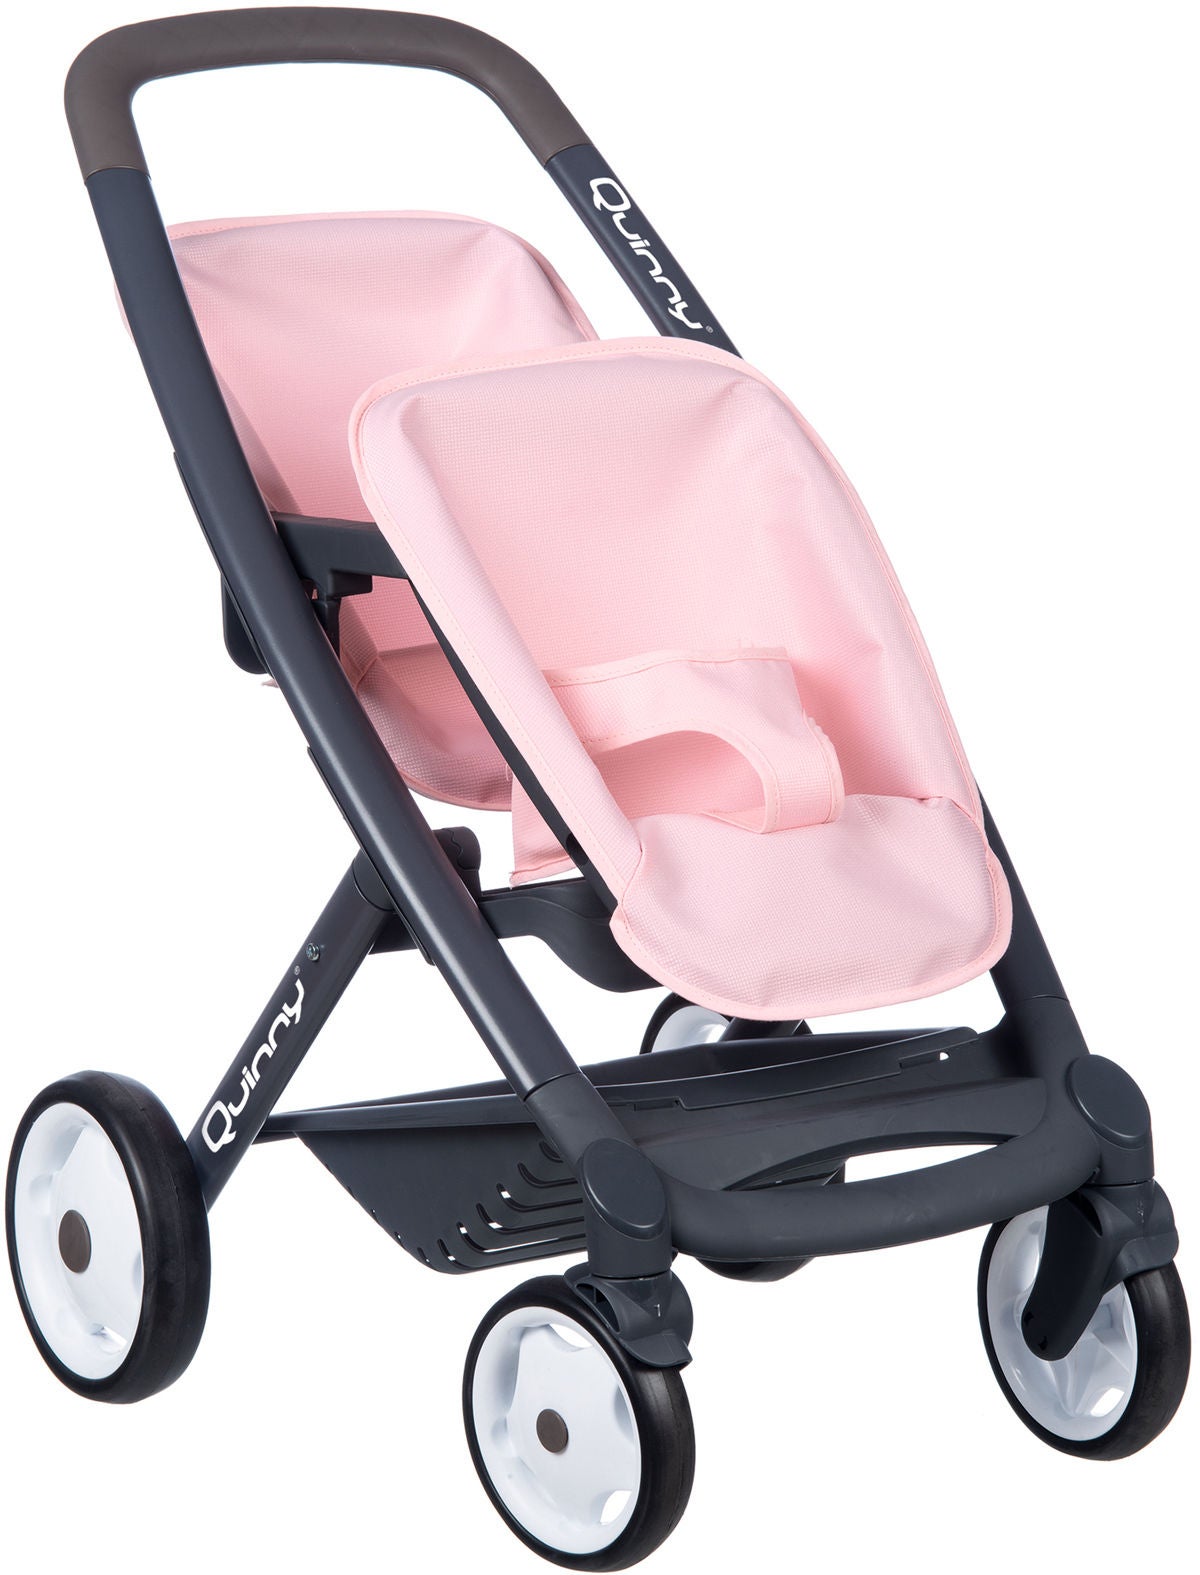 Smoby Maxi-Cosi Zwillingspuppenwagen, Rosa von Smoby